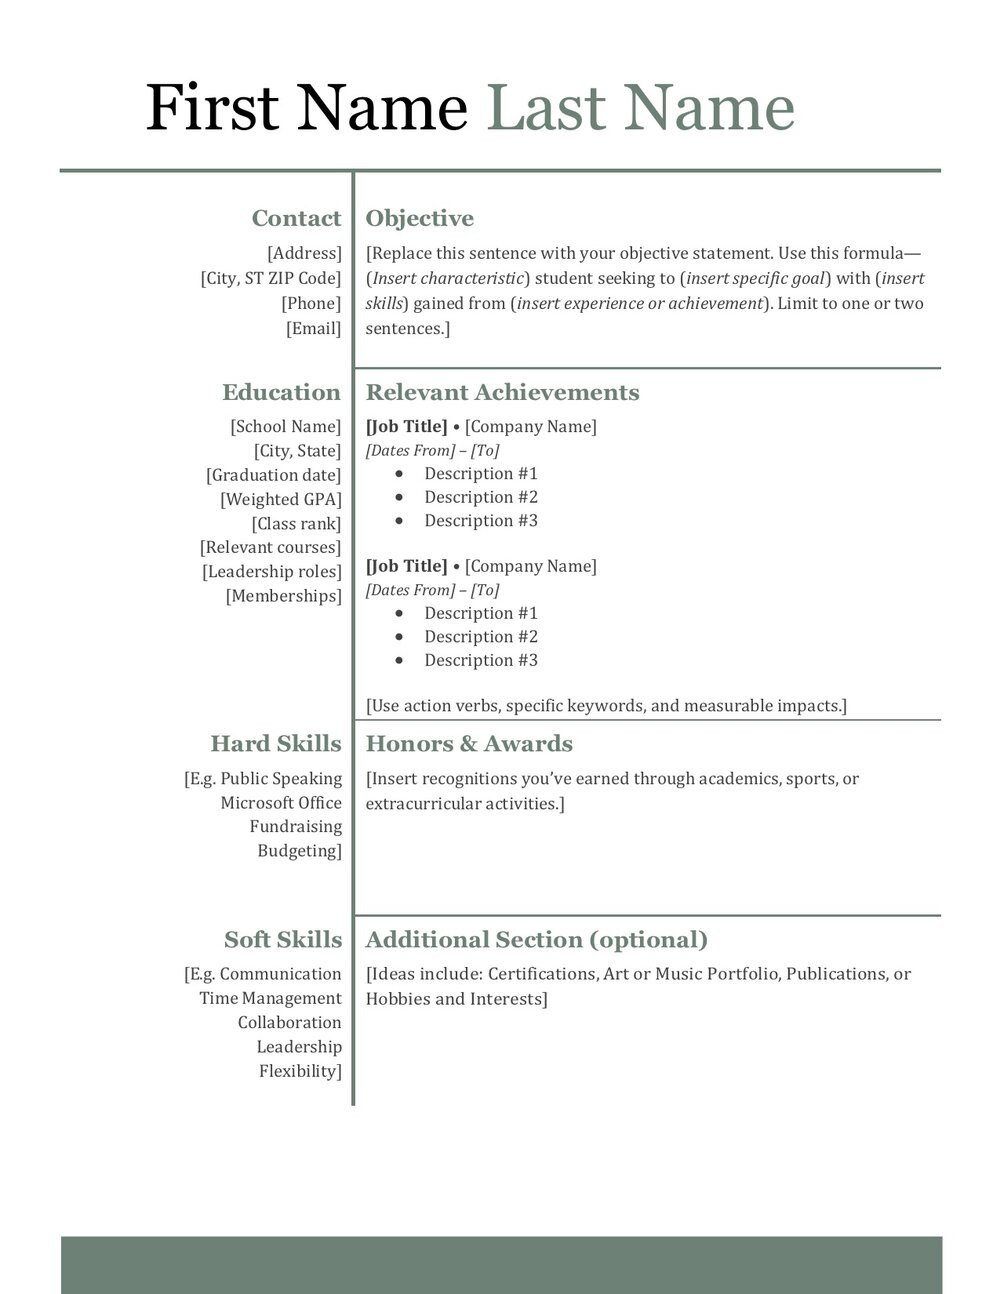 Sample Resume for High School Education Consultant How to Write An Impressive High School Resume â Shemmassian …